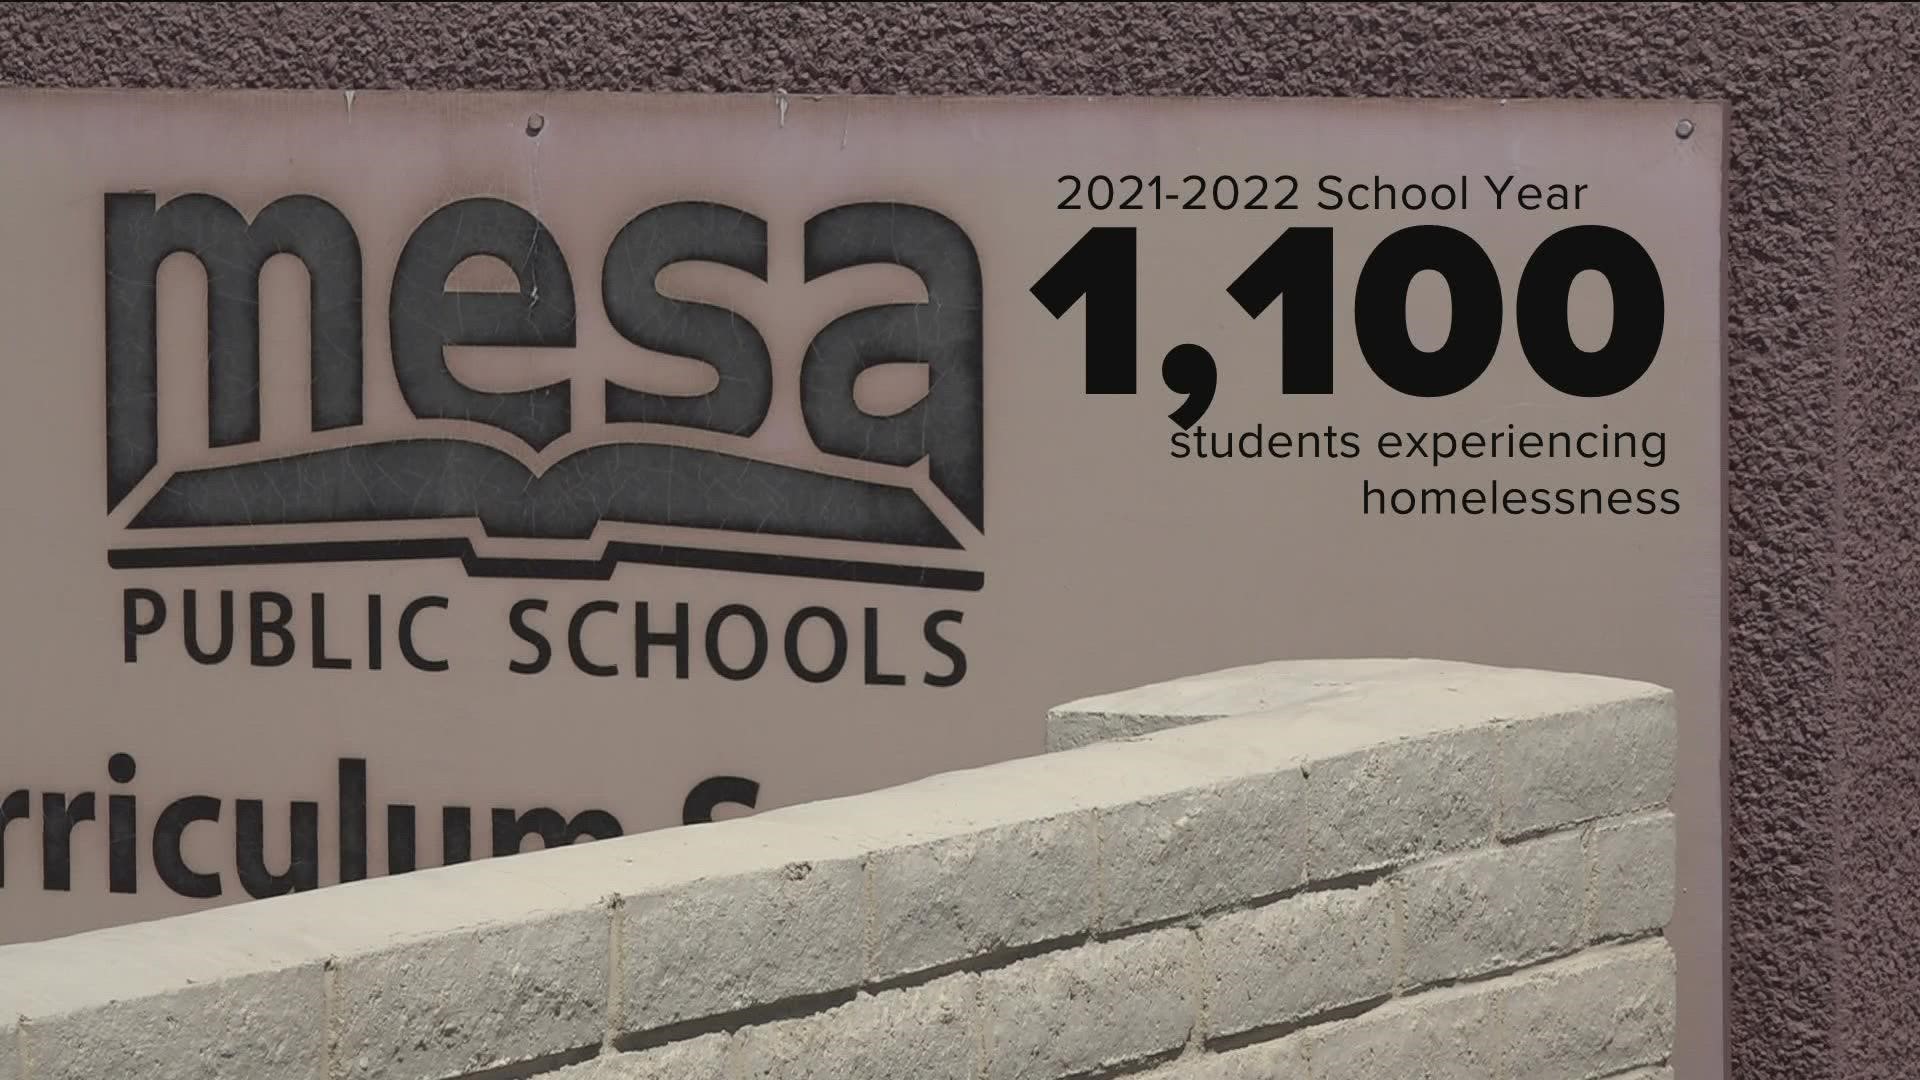 Arizona’s largest school district has hundreds of students currently experiencing homelessness and a team dedicated to making sure those students get help again this